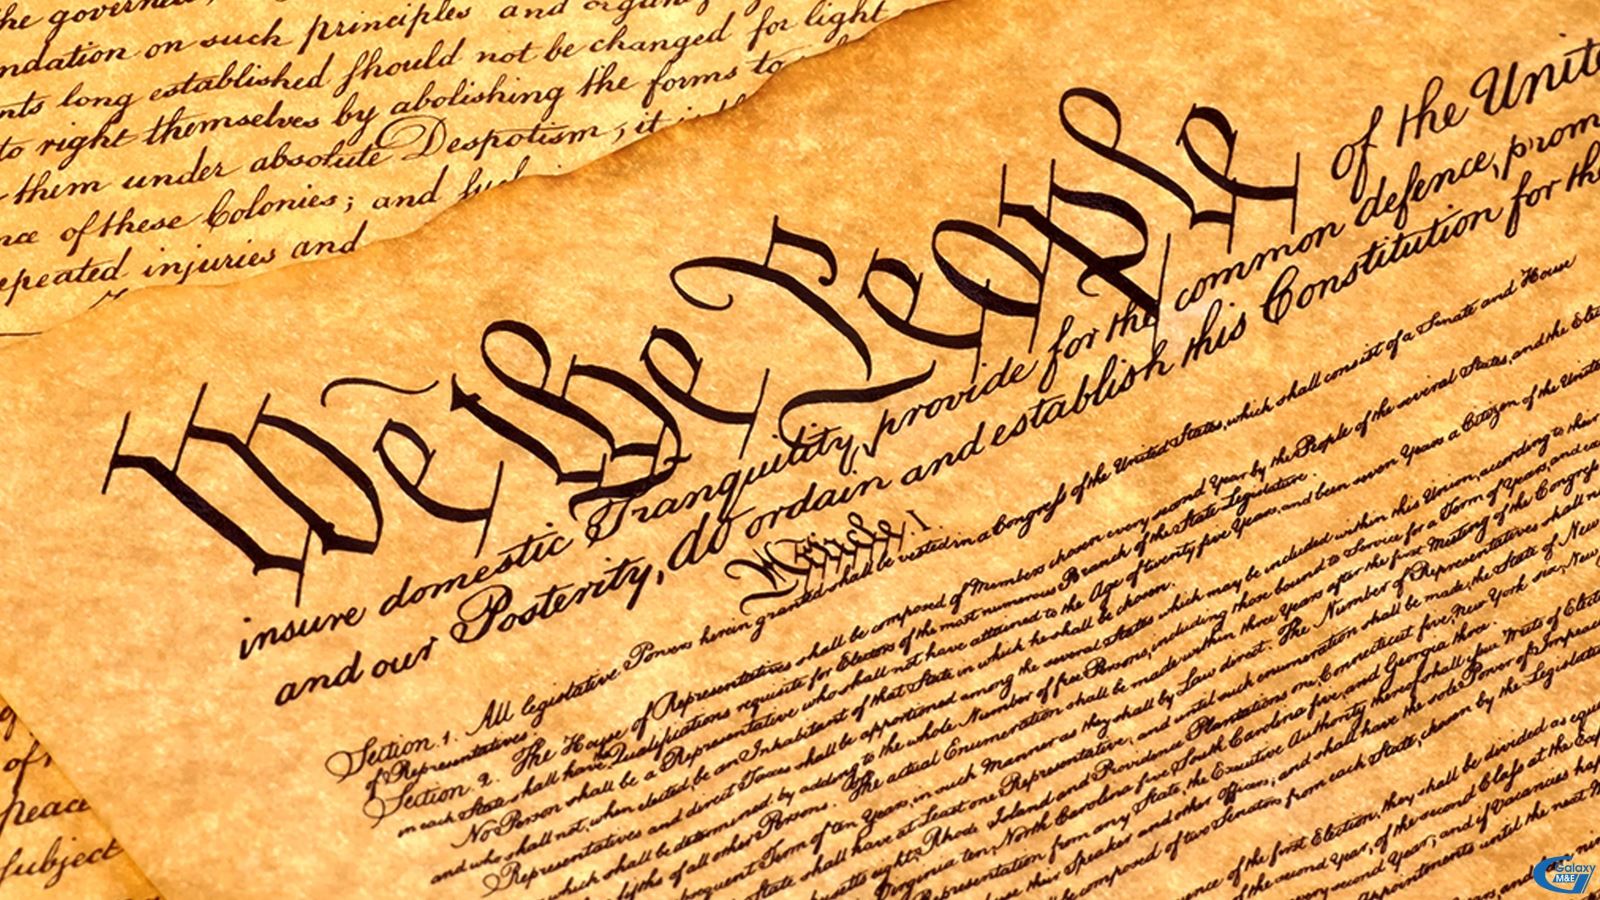 The United States Constitution drafted on September 17th, 1787, was the supreme law of the United States. It is based on the ideology of three powers divided between the legislative branch (the National Assembly), the executive branch (the President) and the judicial branch (the Court) initiated by Montesquieu, the French philosopher. The Constitution was declared a ratification after conferences in the first 13 states. Together with the Declaration of Independence, written in 1776, this Constitution showed the American spirit of science, progress and humanity in building the first republic in the world. It created a unified and more centralized government under Union Terms.